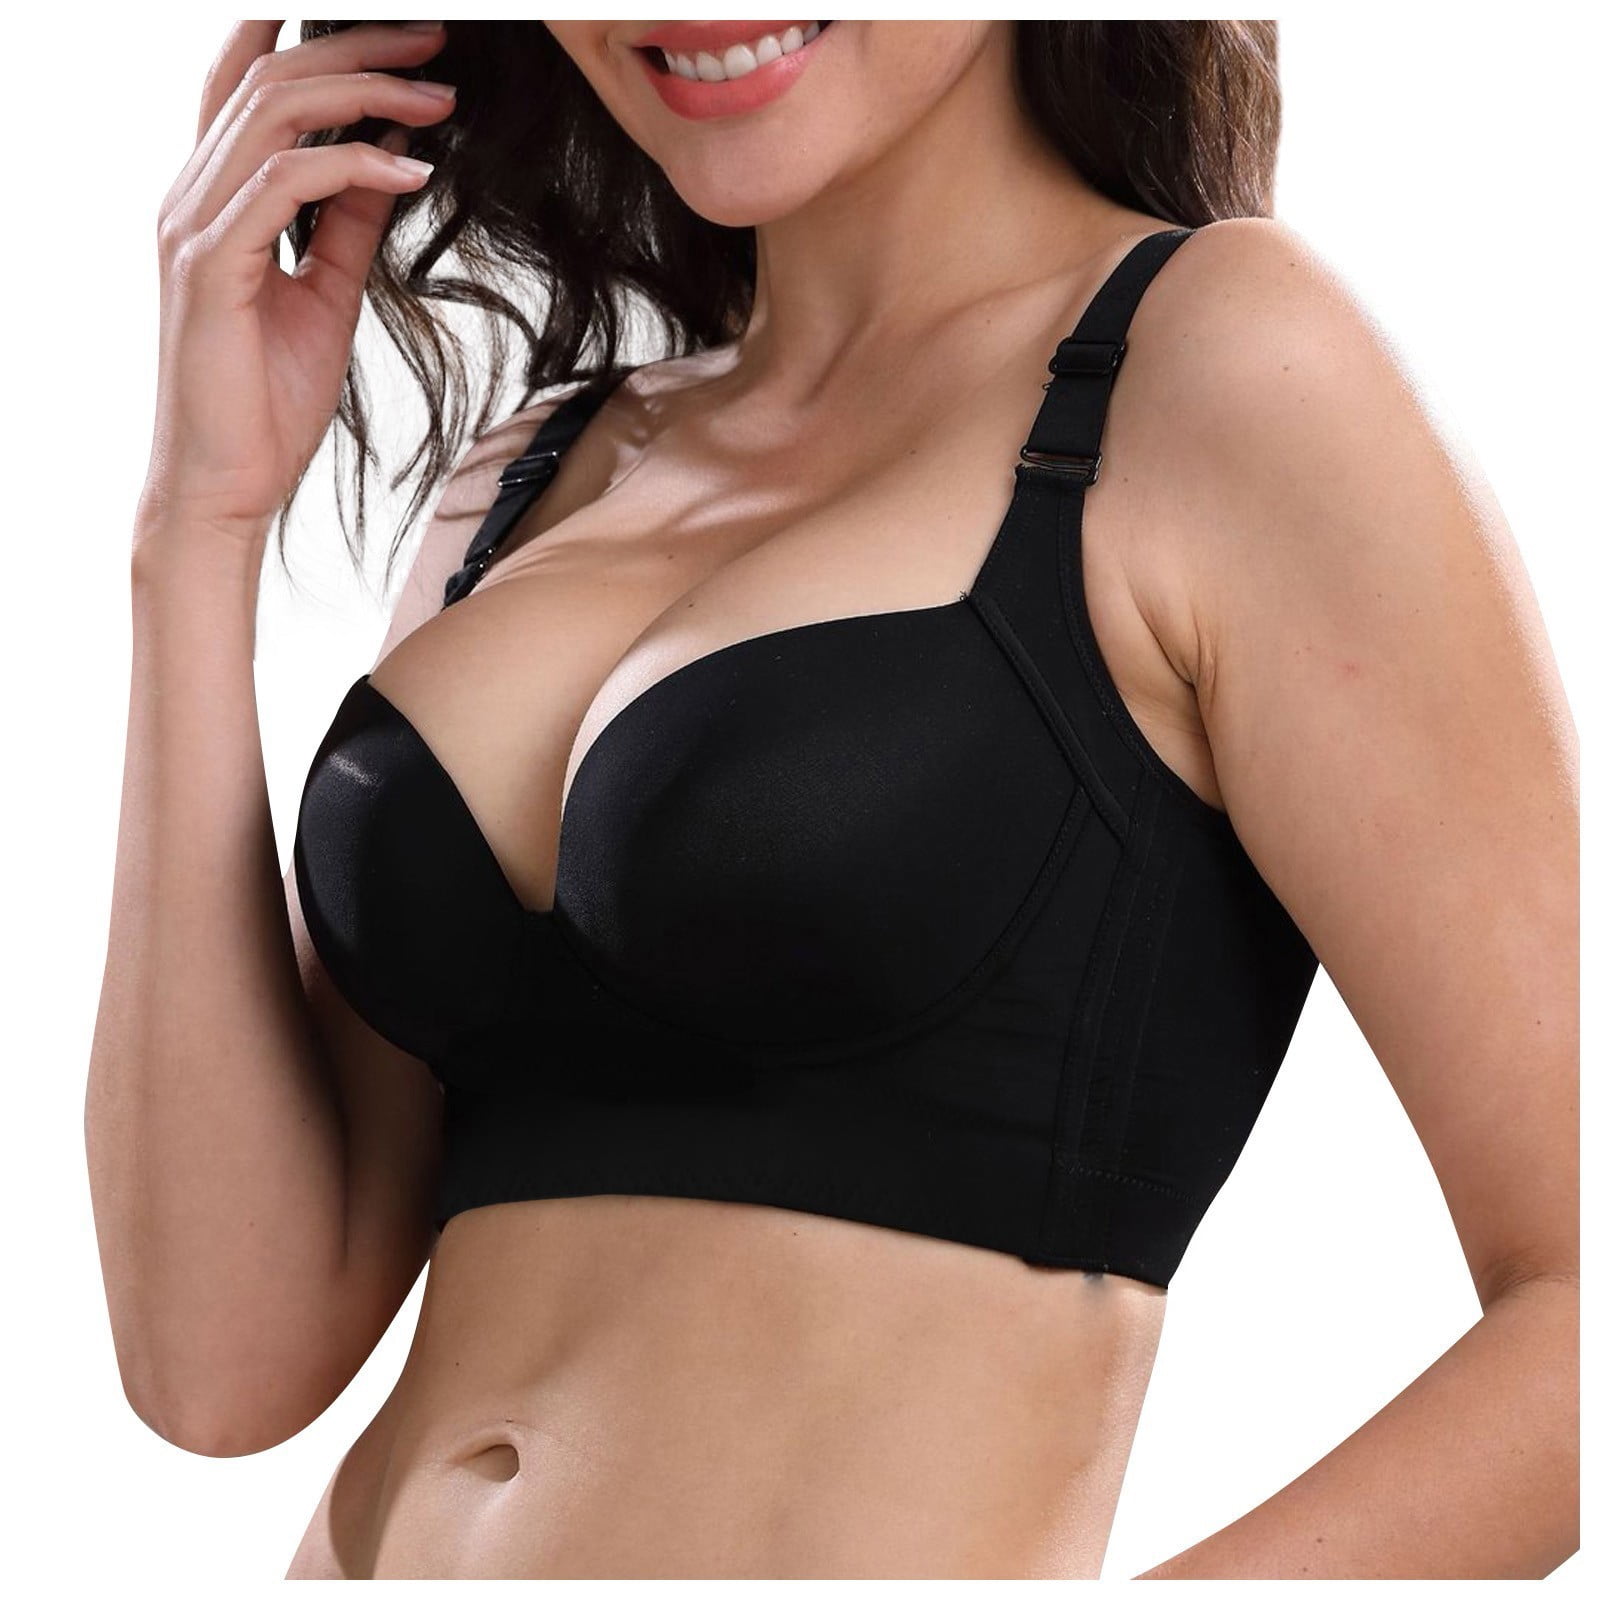 34E Bra Size in D Cup Sizes Black Larger Cup, Maternity and Support Bras